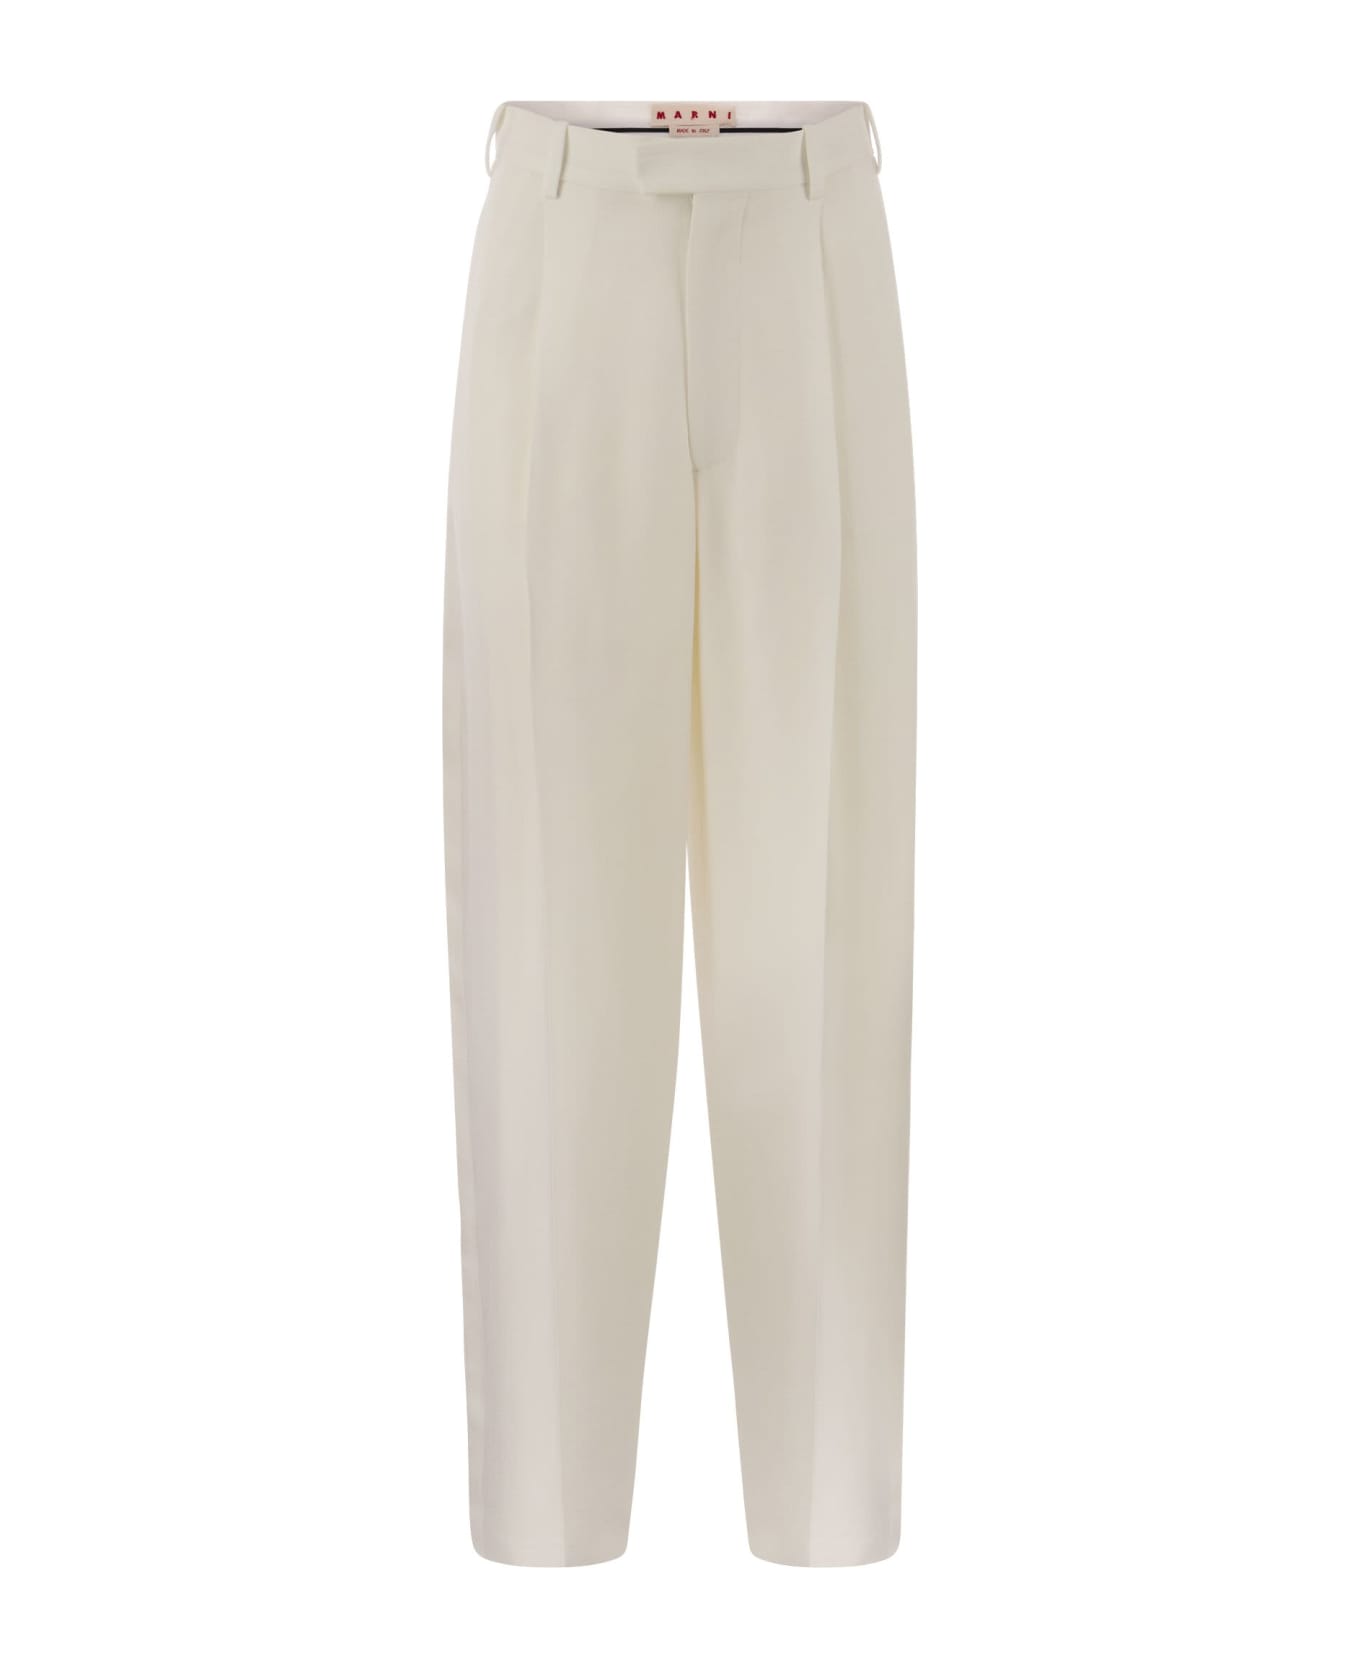 Marni Cady Tailored Trousers - White